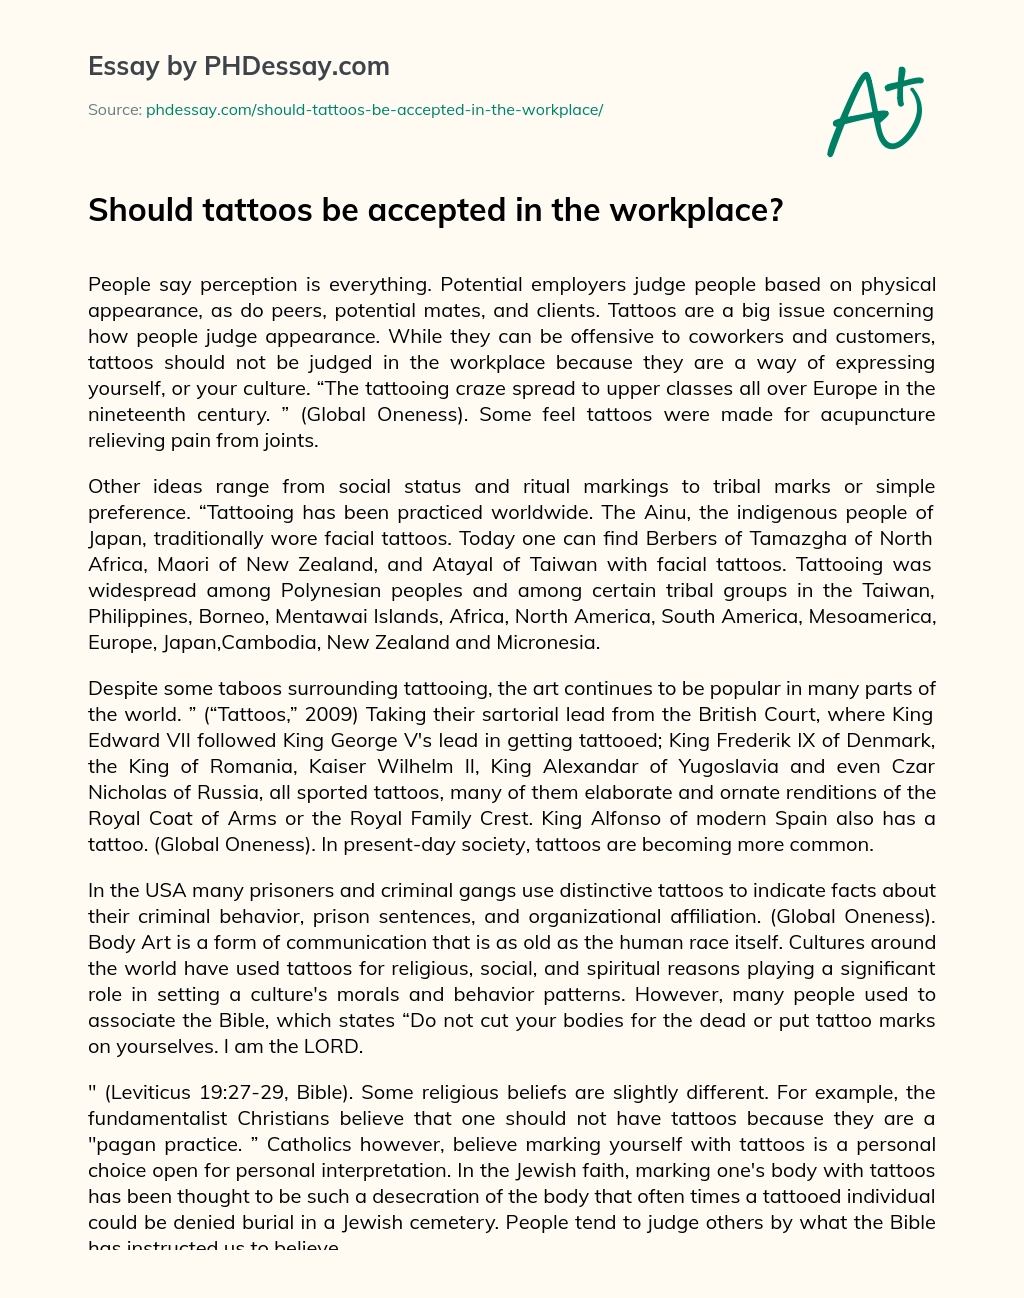 Should tattoos be allowed in the workplace essay